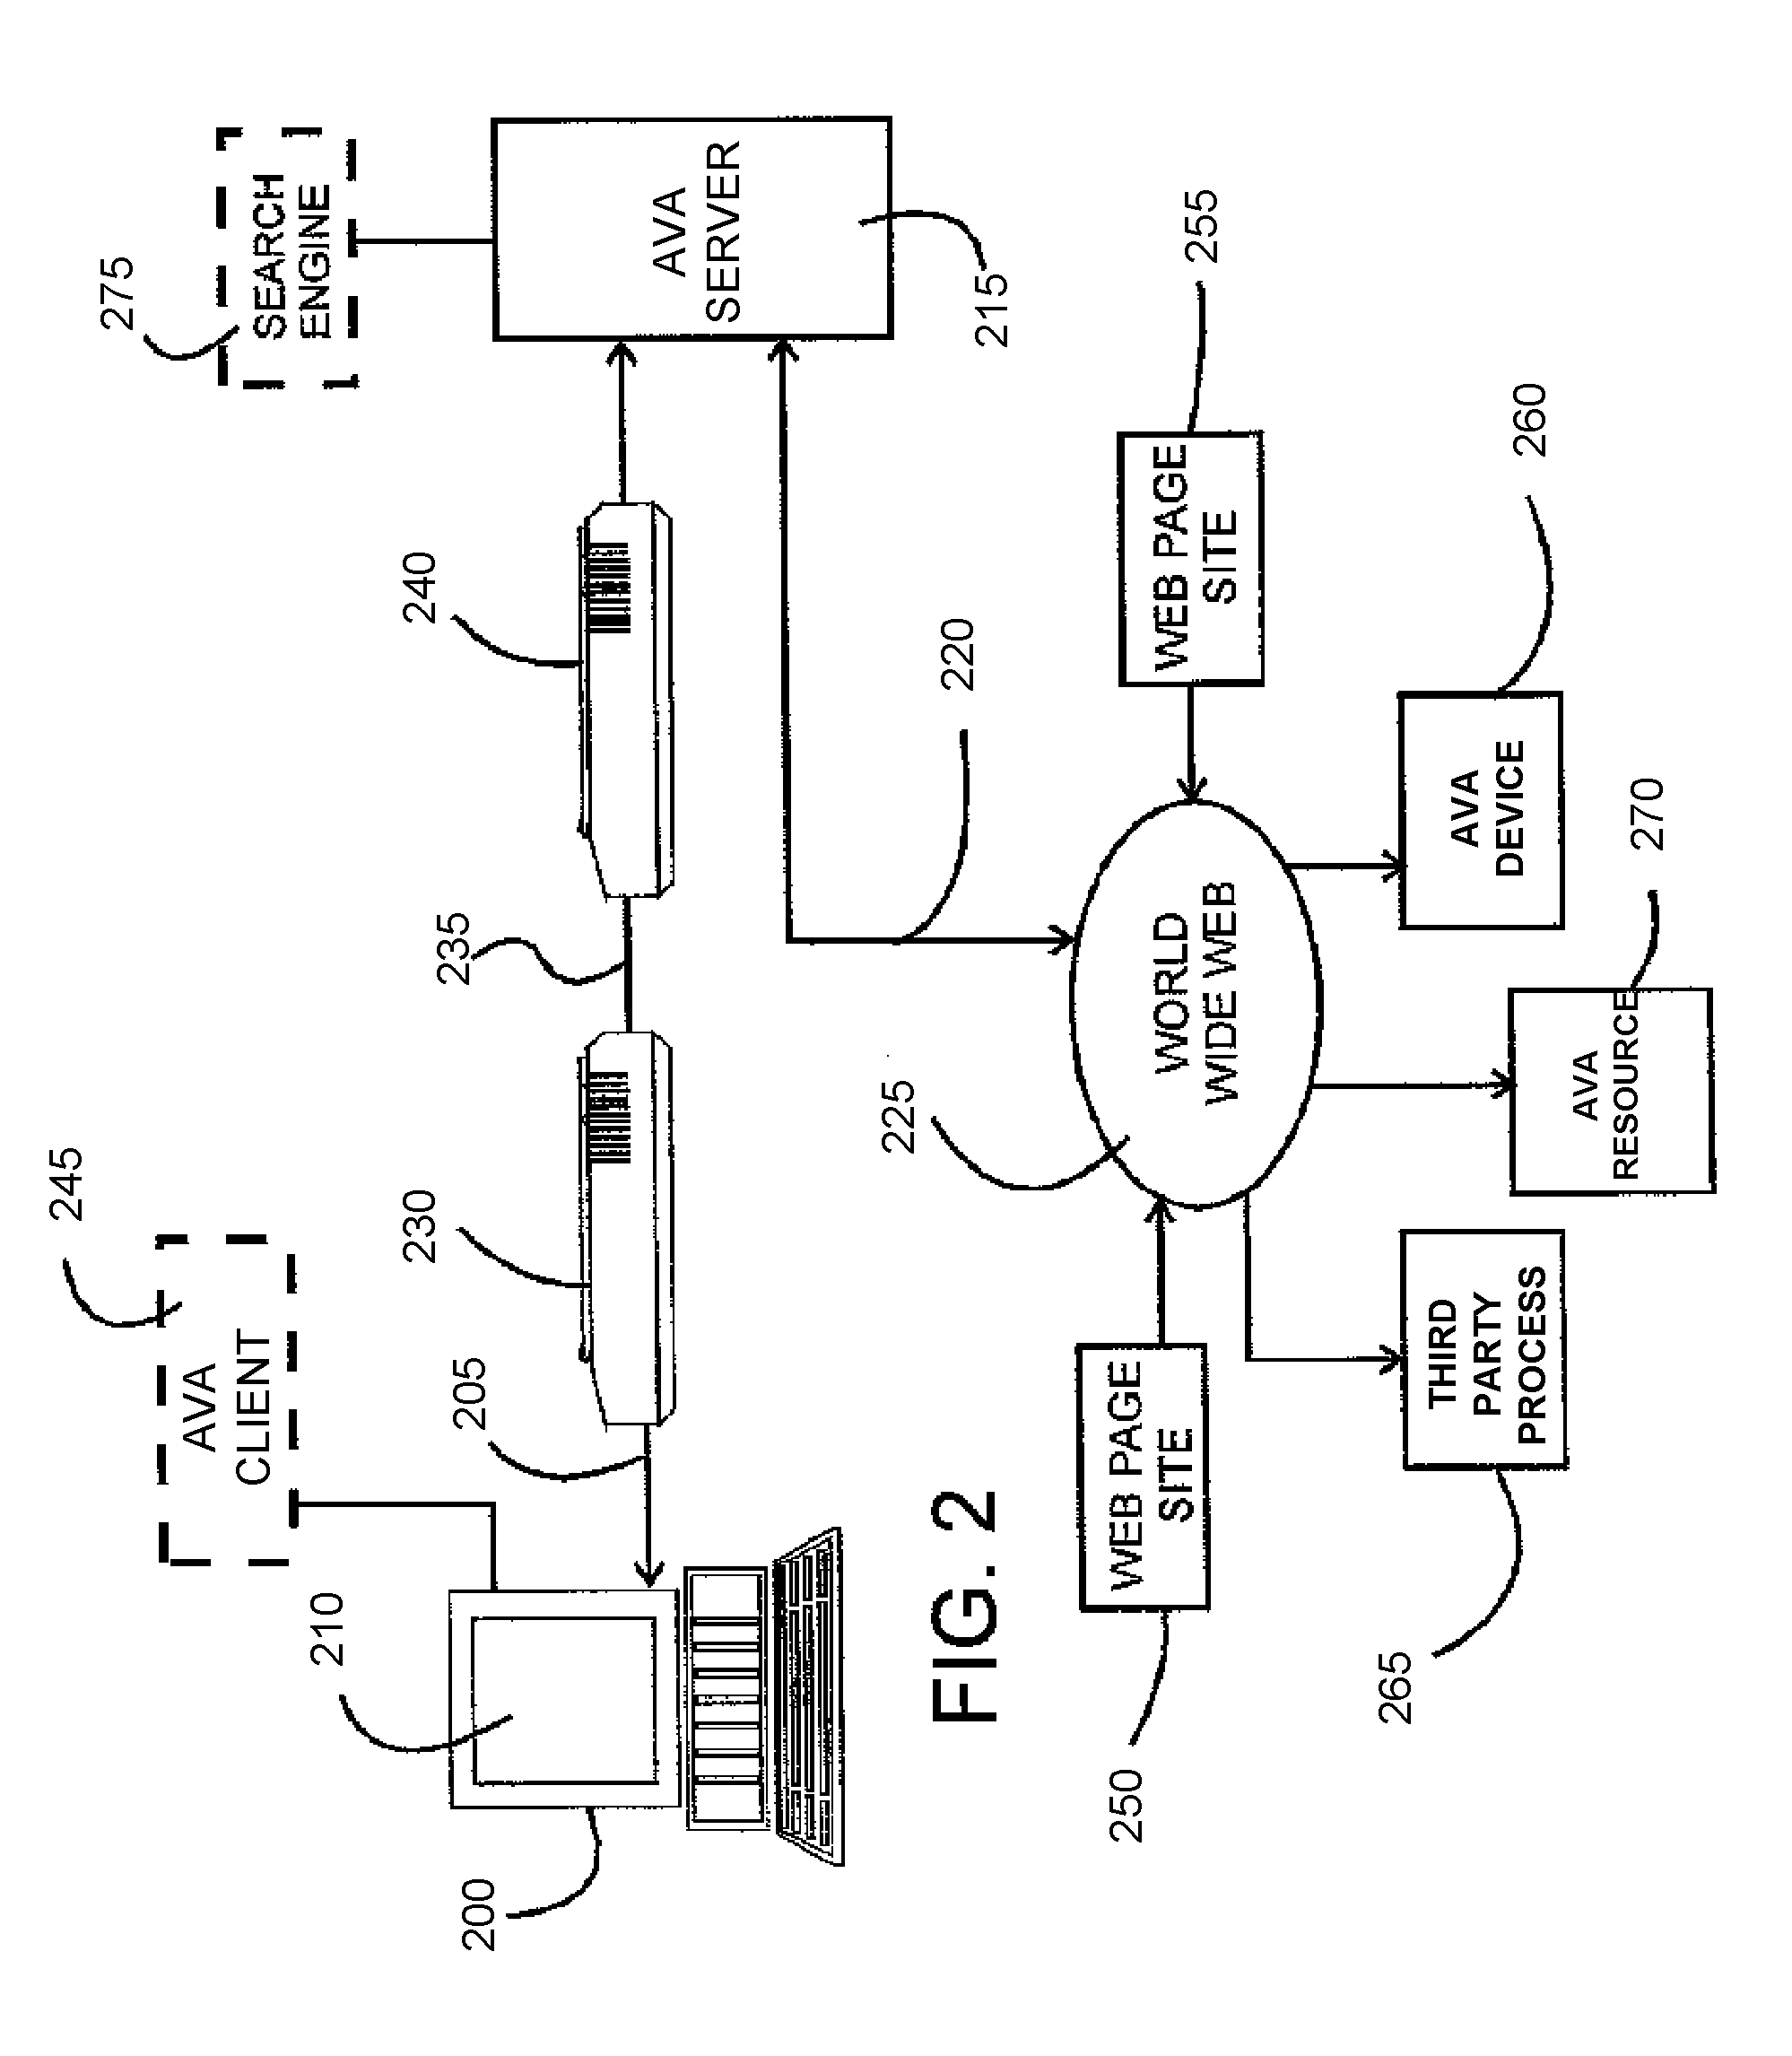 System, method, and computer program product for concurrent collaboration of media